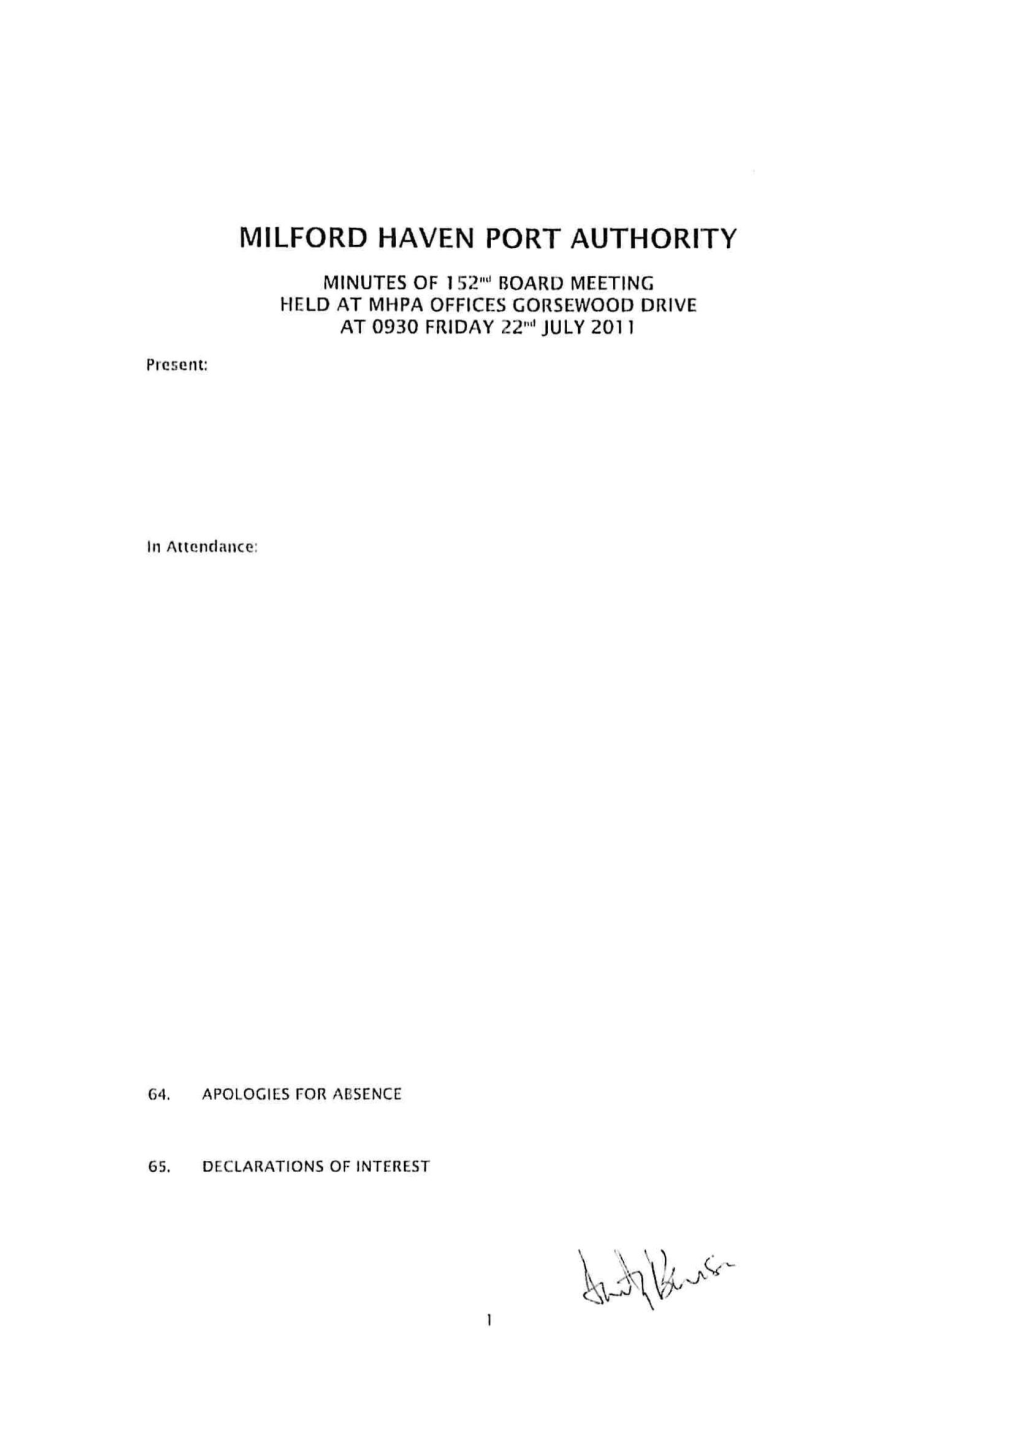 Milford Haven Port Authority